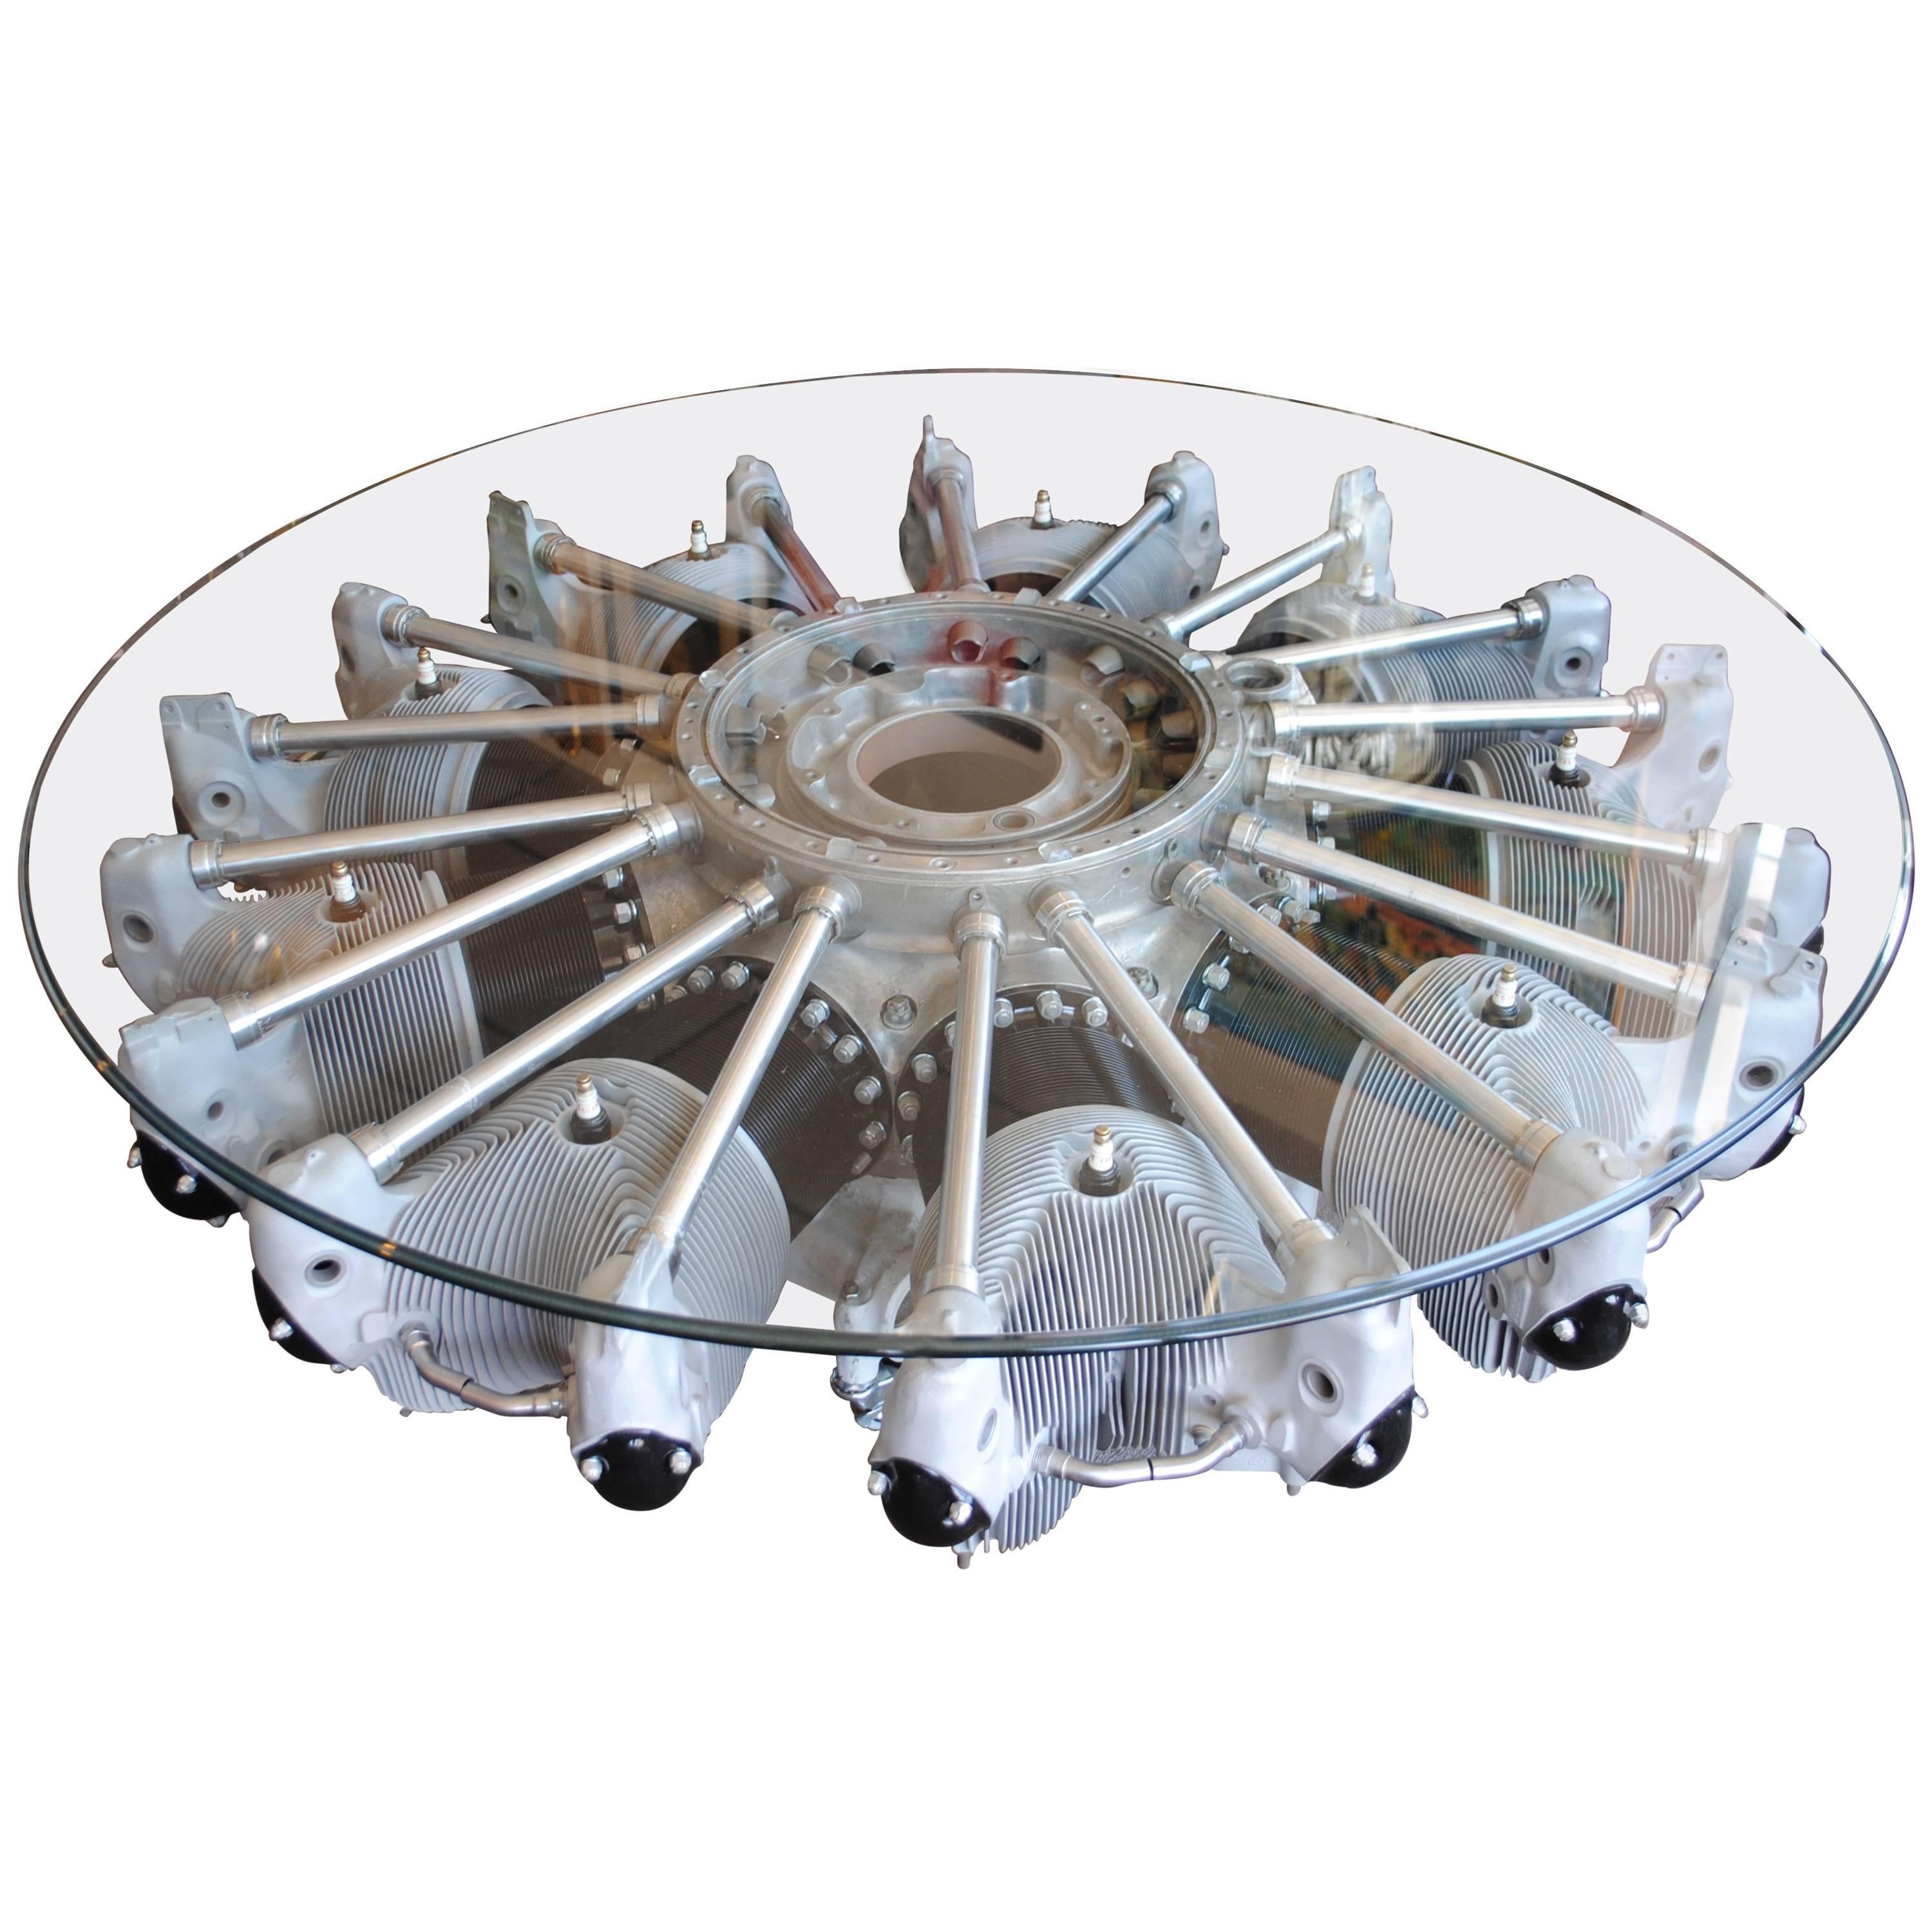 Nine Cylinder Radial Aircraft Engine Coffee Table For Sale